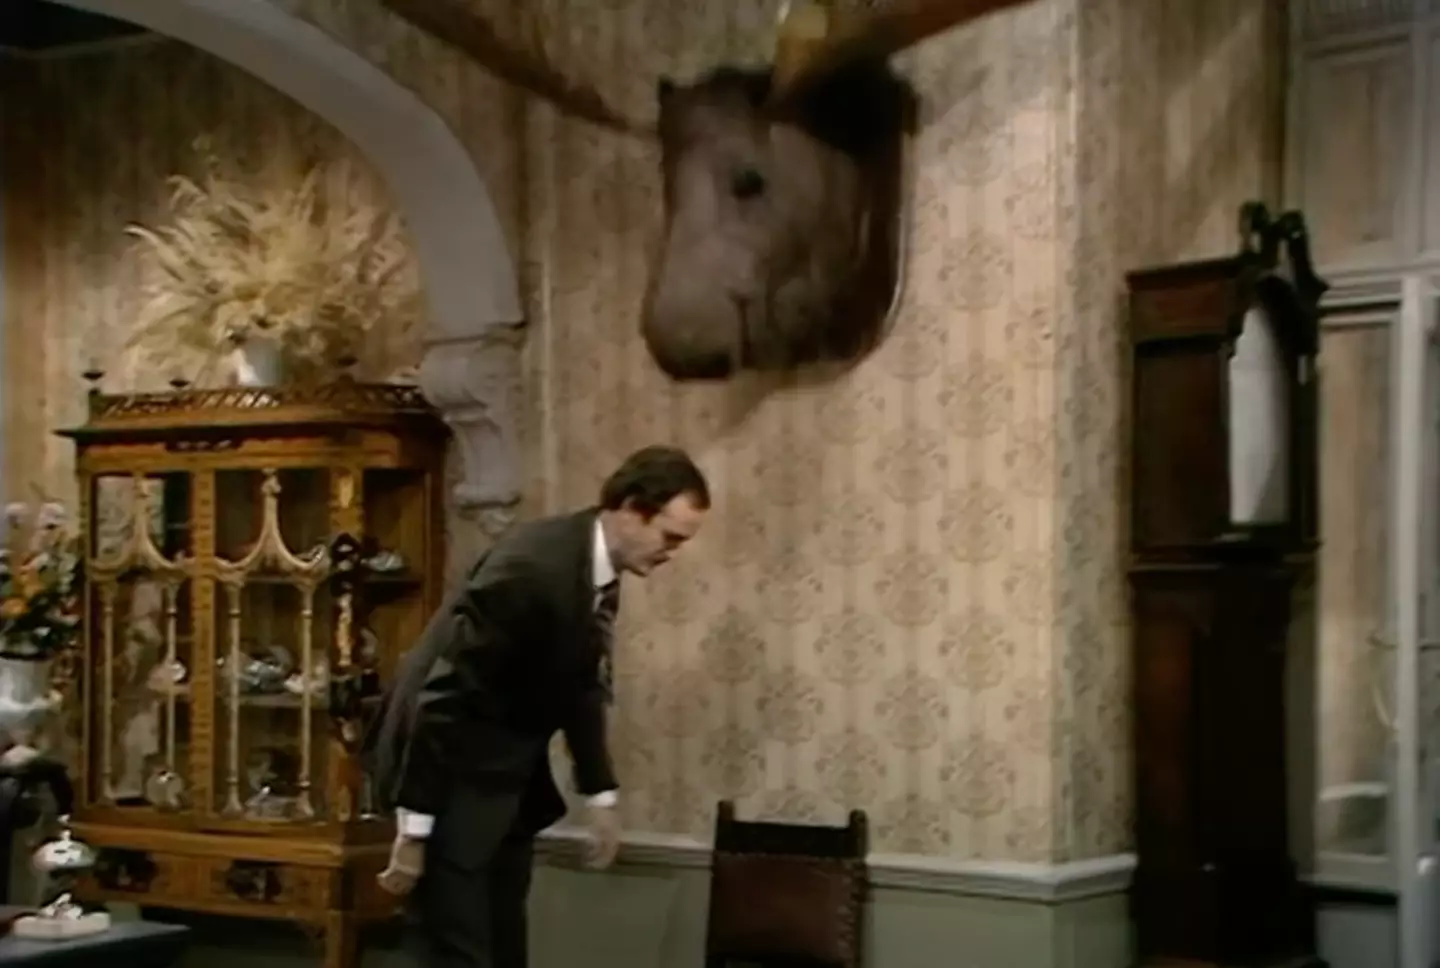 This is the scene Cleese regrets most.